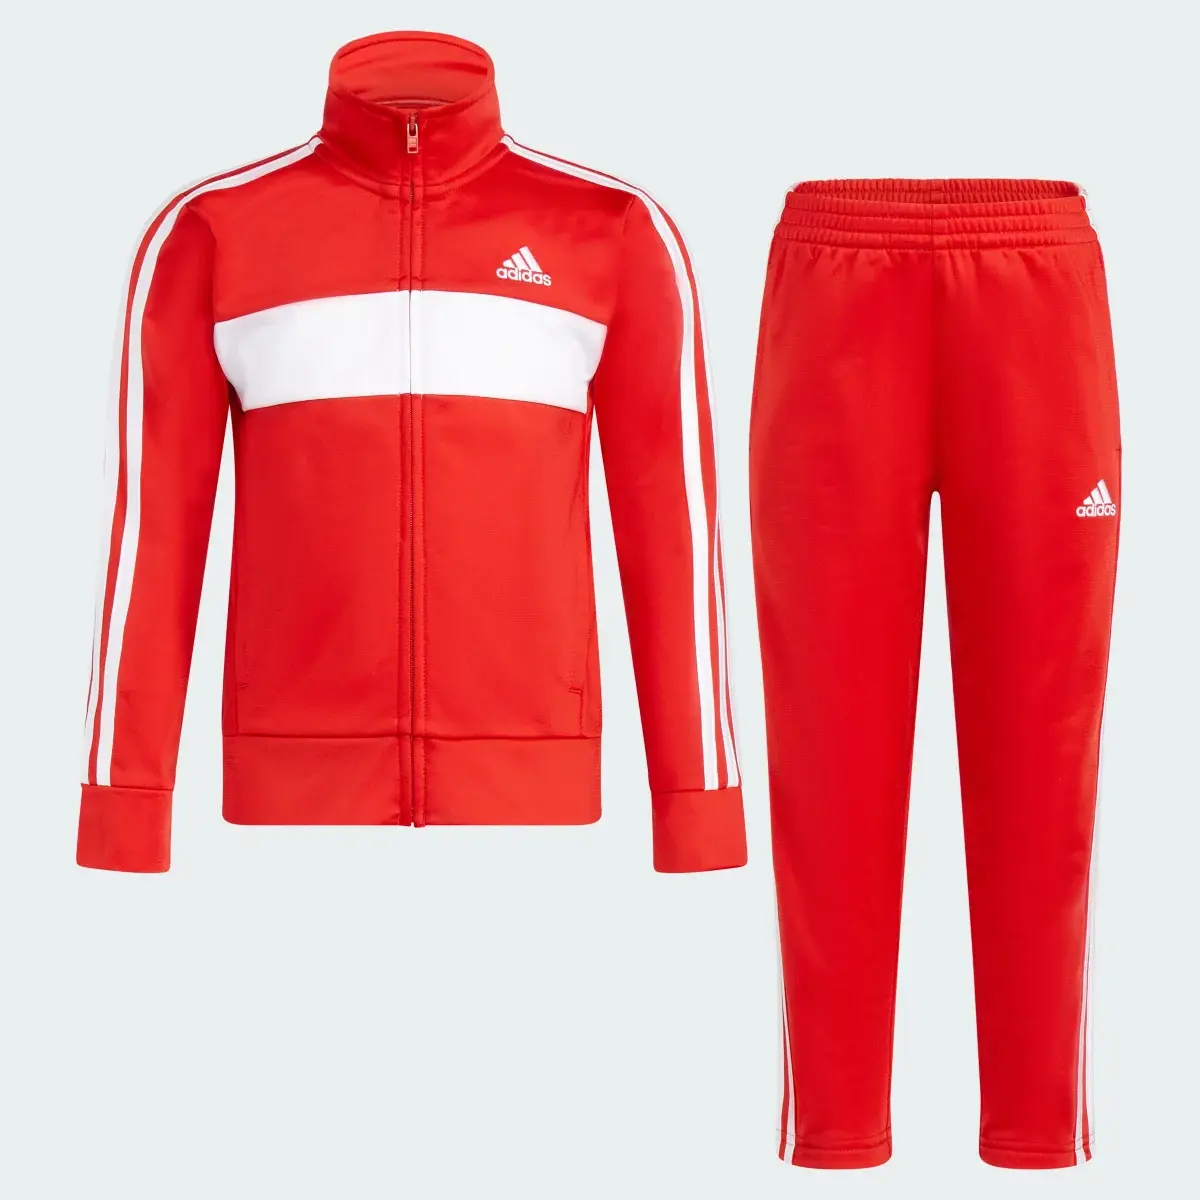 Adidas Two-Piece Essential Tricot Jacket Set. 3